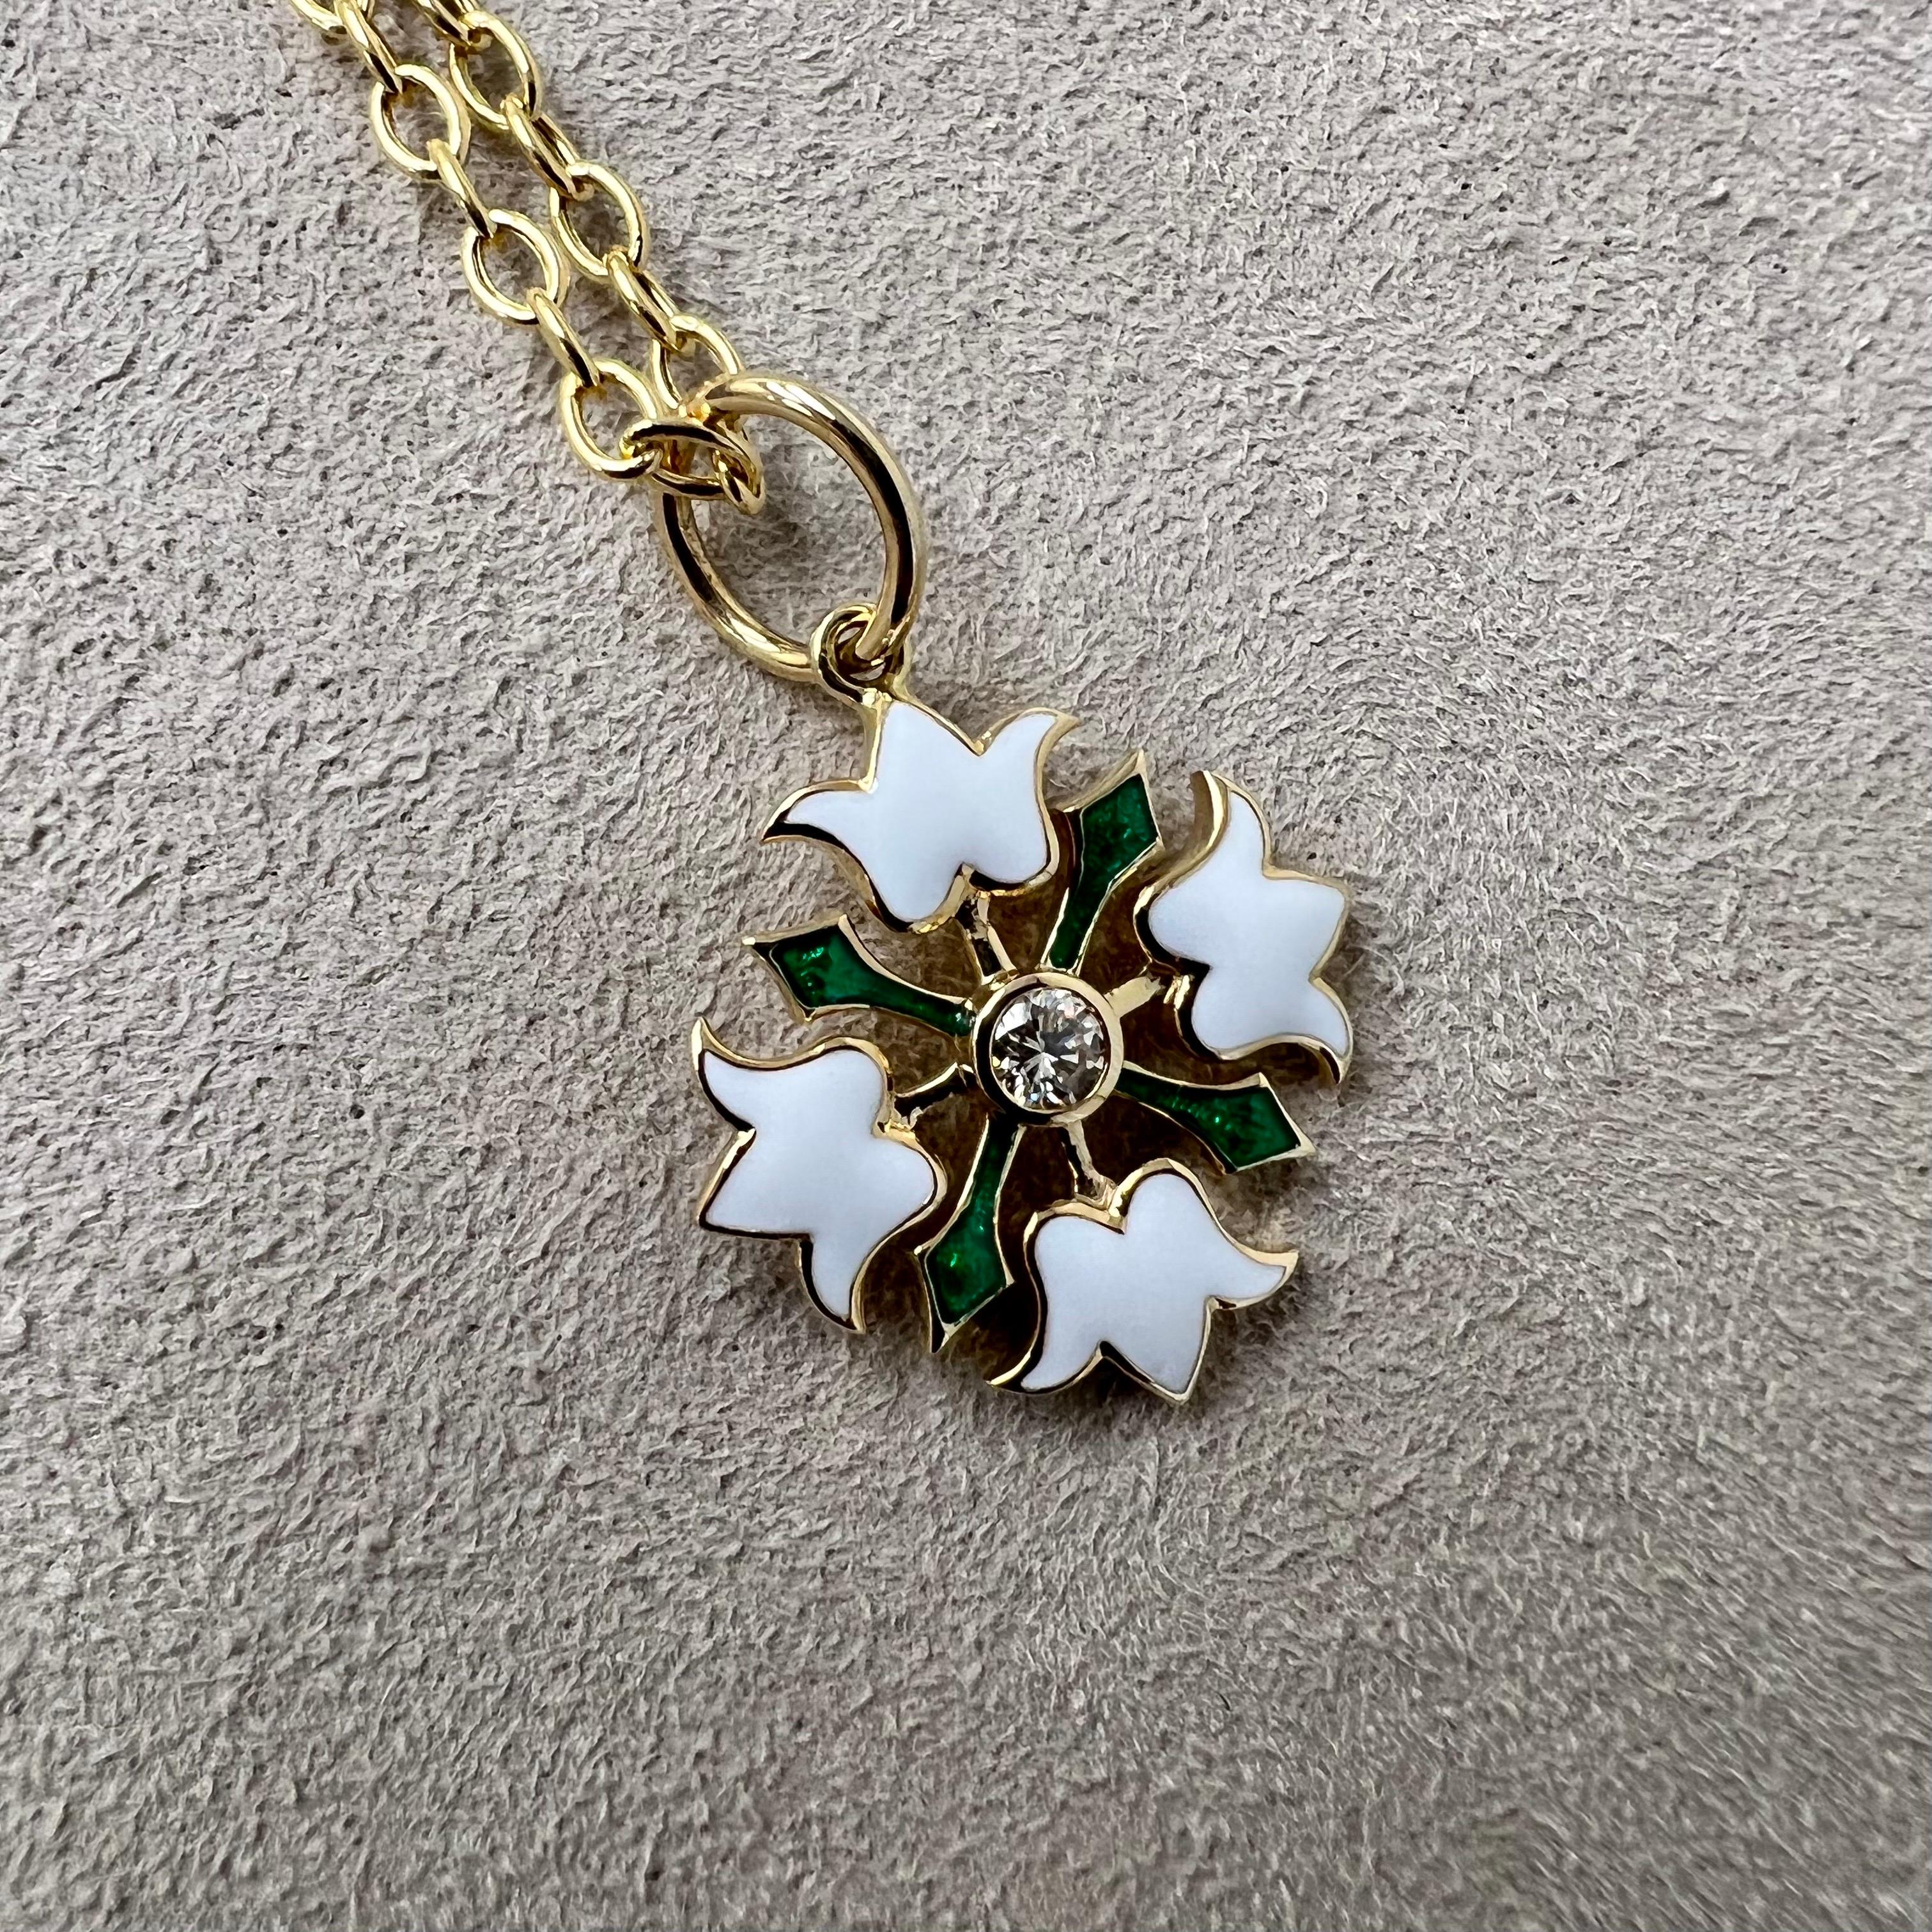 Created in 18 karat yellow gold
Green and white enamel details
Diamonds 0.10 carat approx.
Limited edition
Chain sold separately

Expertly crafted in 18 karat yellow gold, this limited edition pendant is adorned with elegant green and white enamel